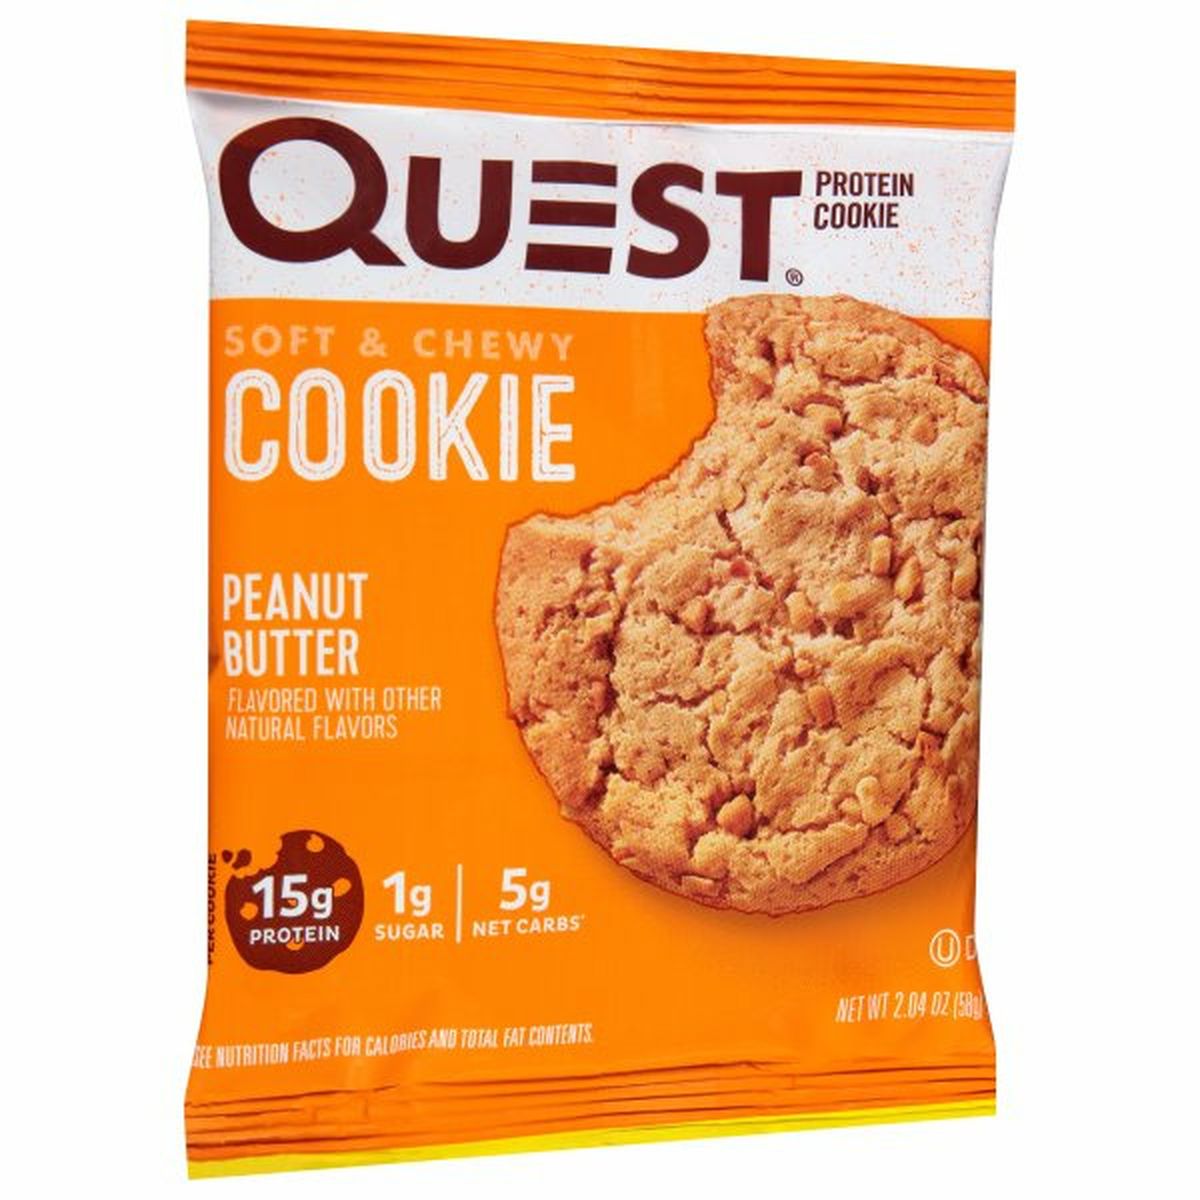 Calories in Quest Protein Cookie, Peanut Butter